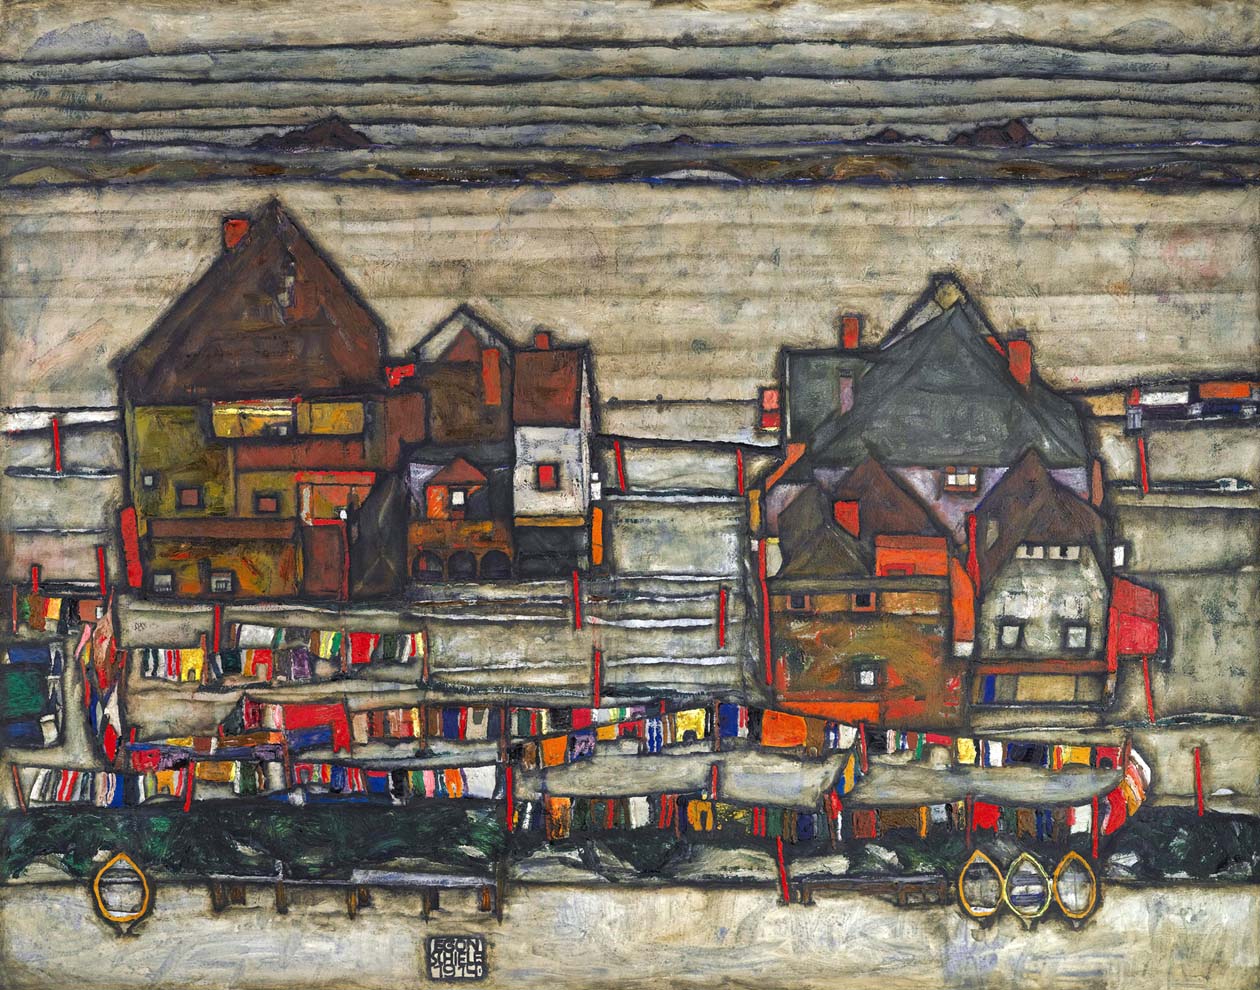 Egon Schiele Houses with colorful laundry Giclee Limited Edition